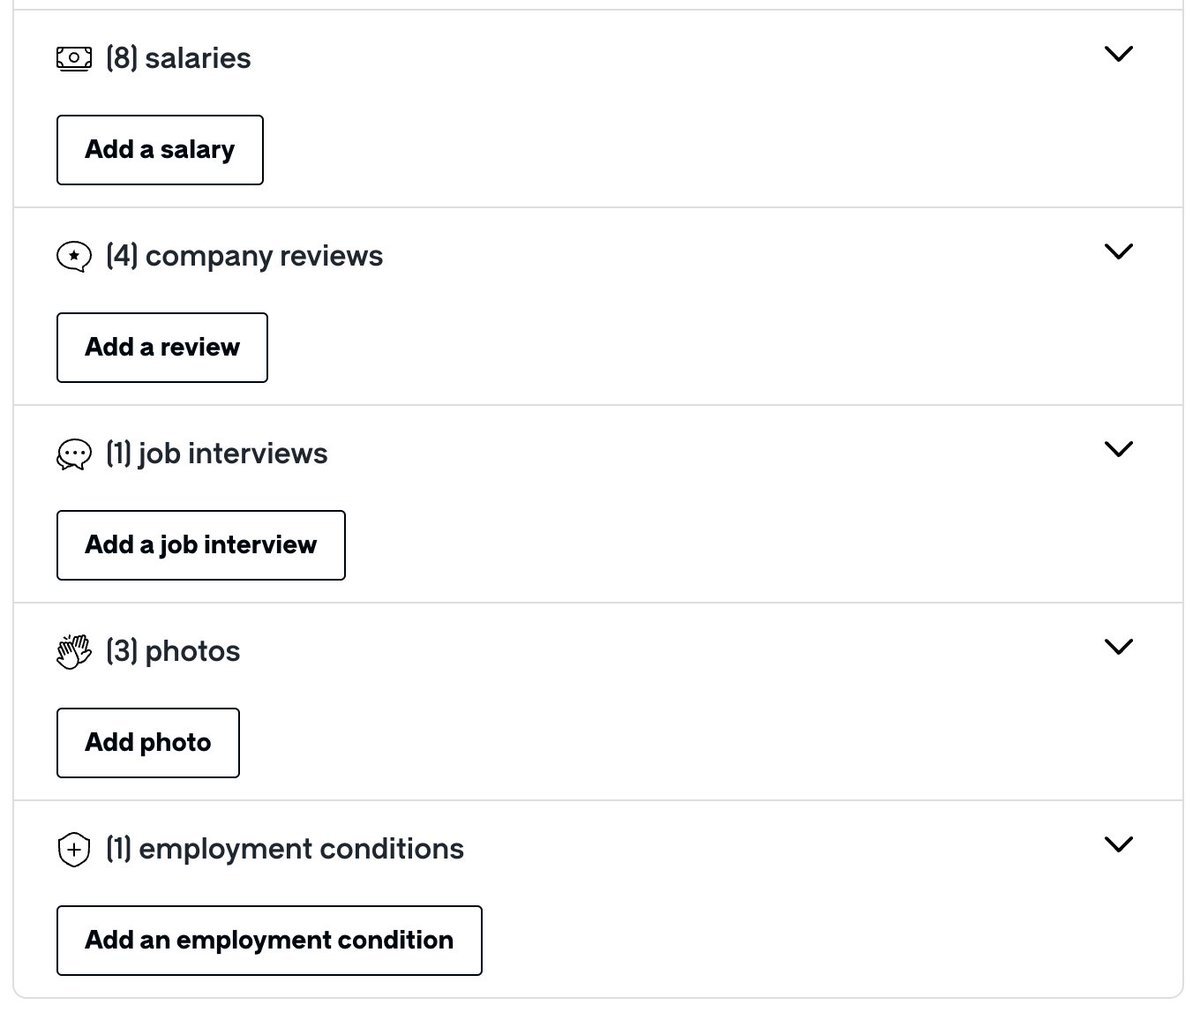 Ok, this is it. Went to Glassdoor and am removing every single past contribution (salary, review, rating) I made. The point of Glassdoor was that they keep all this anonymous. The company doxxing people is not something I want to contribute to.